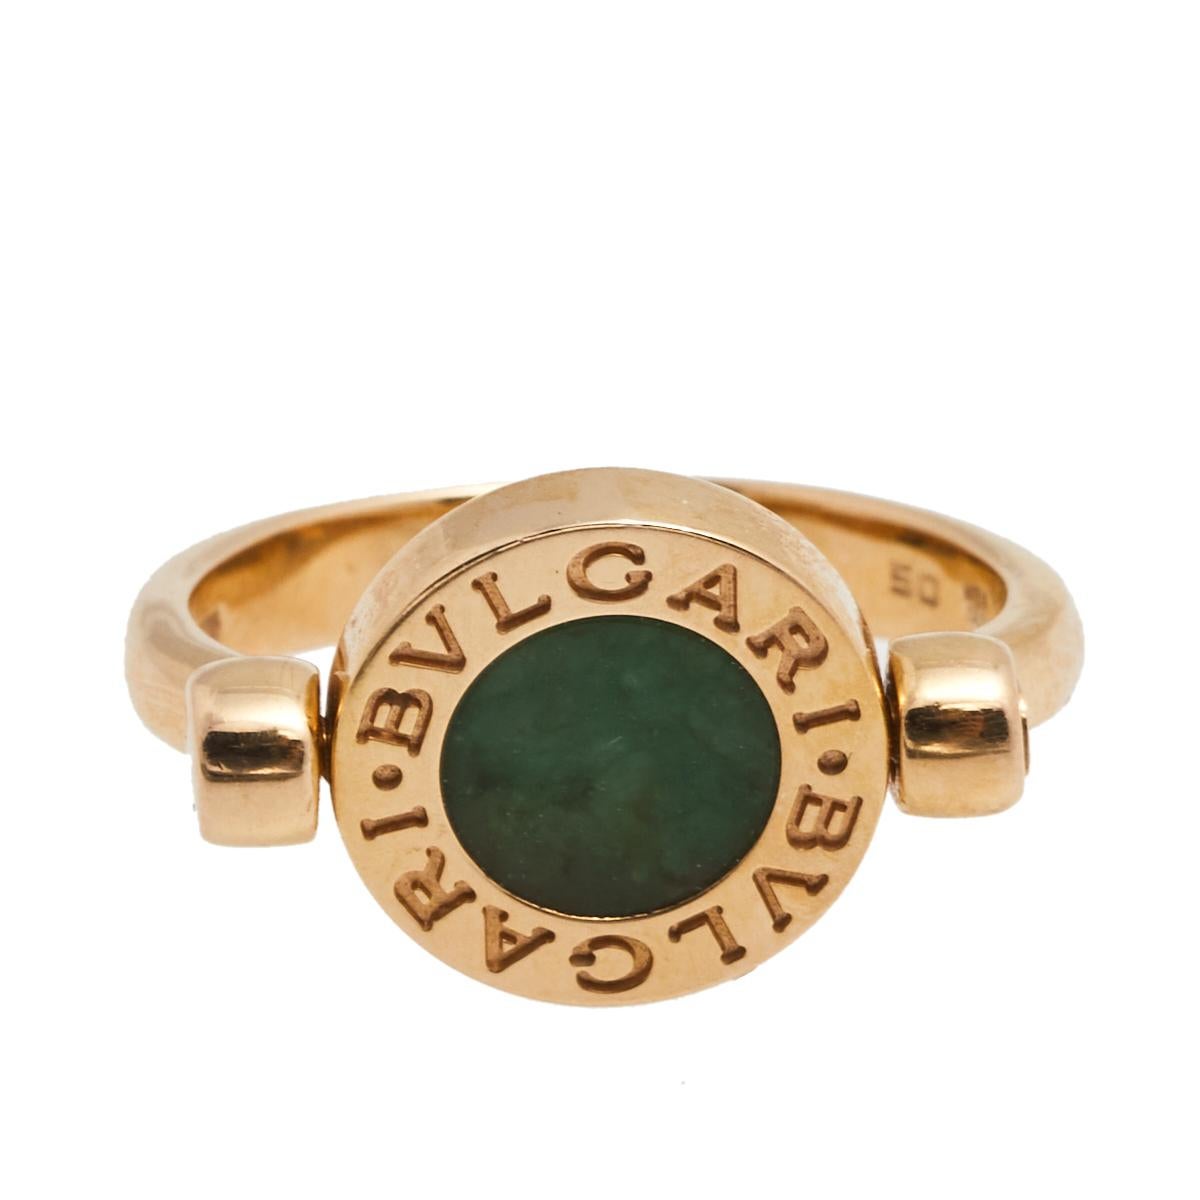 The Bvlgari Bvlgari logo of the brand—a characteristic feature of the Bvlgari designs—was inspired by the inscriptions on the ancient coins. With history engraved on the very face, this beautiful ring delivers a harmonic balance of ethereal 18k gold